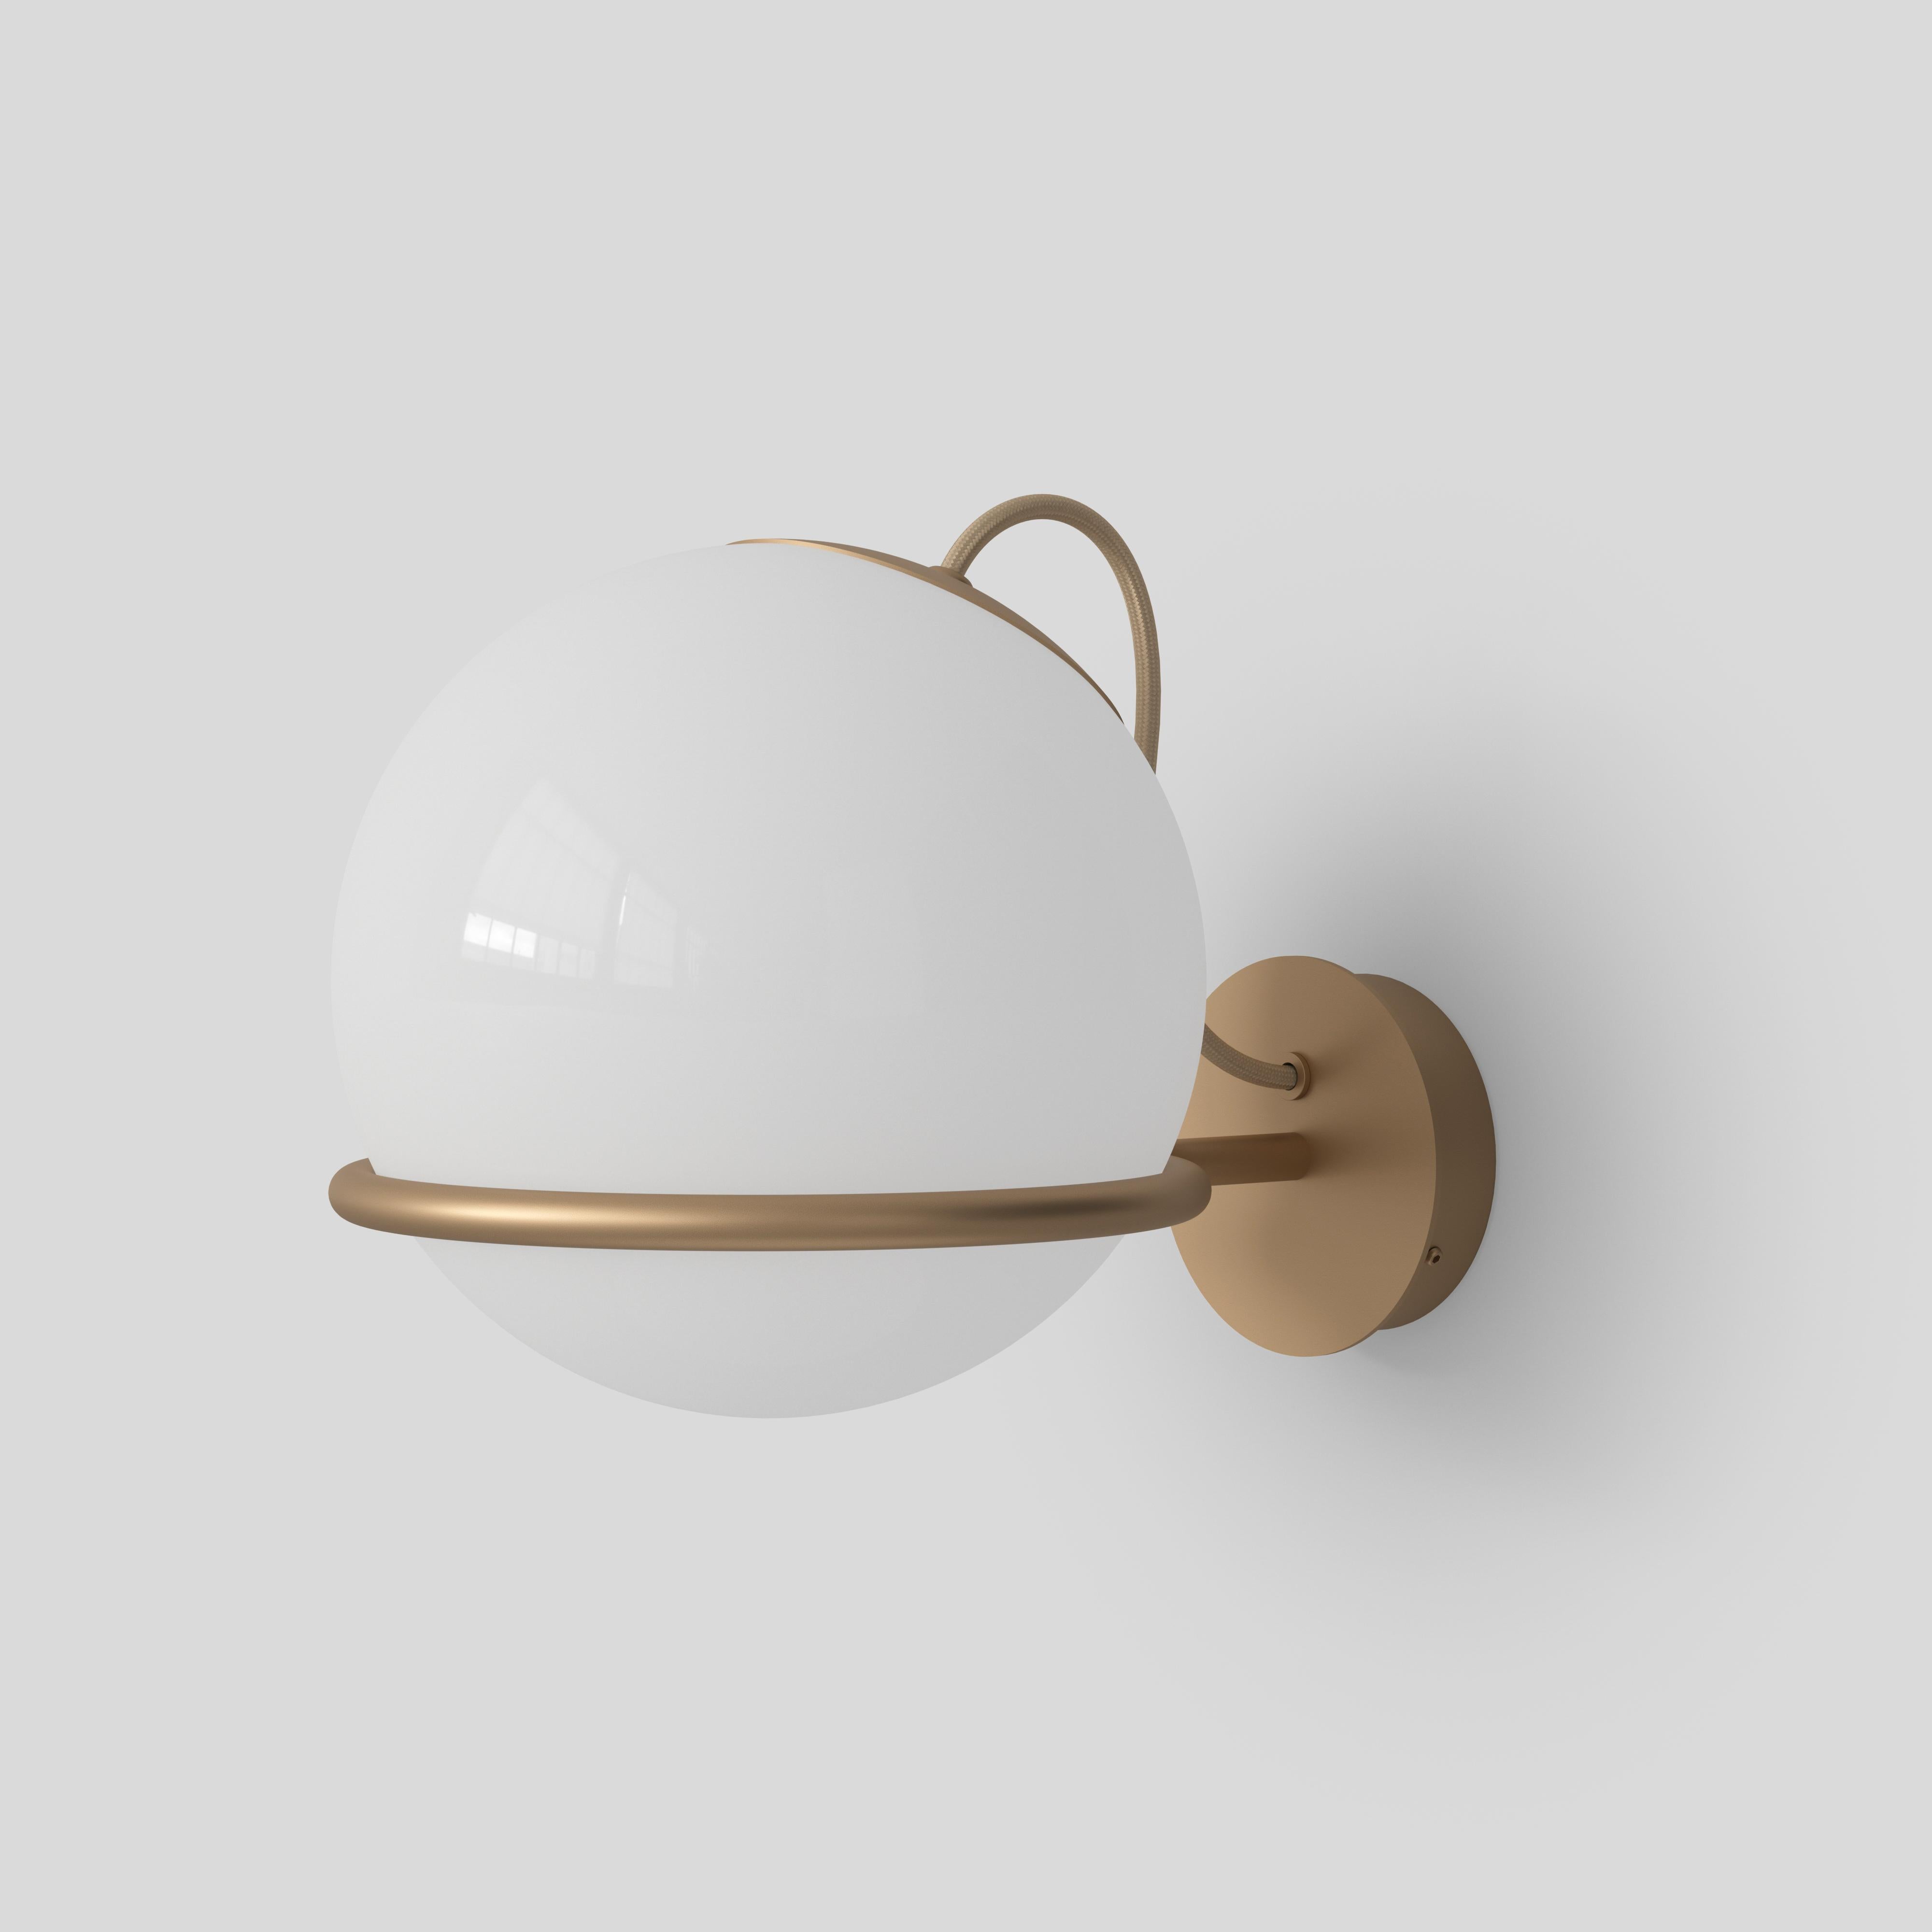 Model 237/1
Design by Gino Sarfatti
The single blown opaline glass sphere is gently held by a black or champagne painted aluminium ring. The aluminum ring has a small cut, enabling the sphere to be placed facing downward or upward and thus